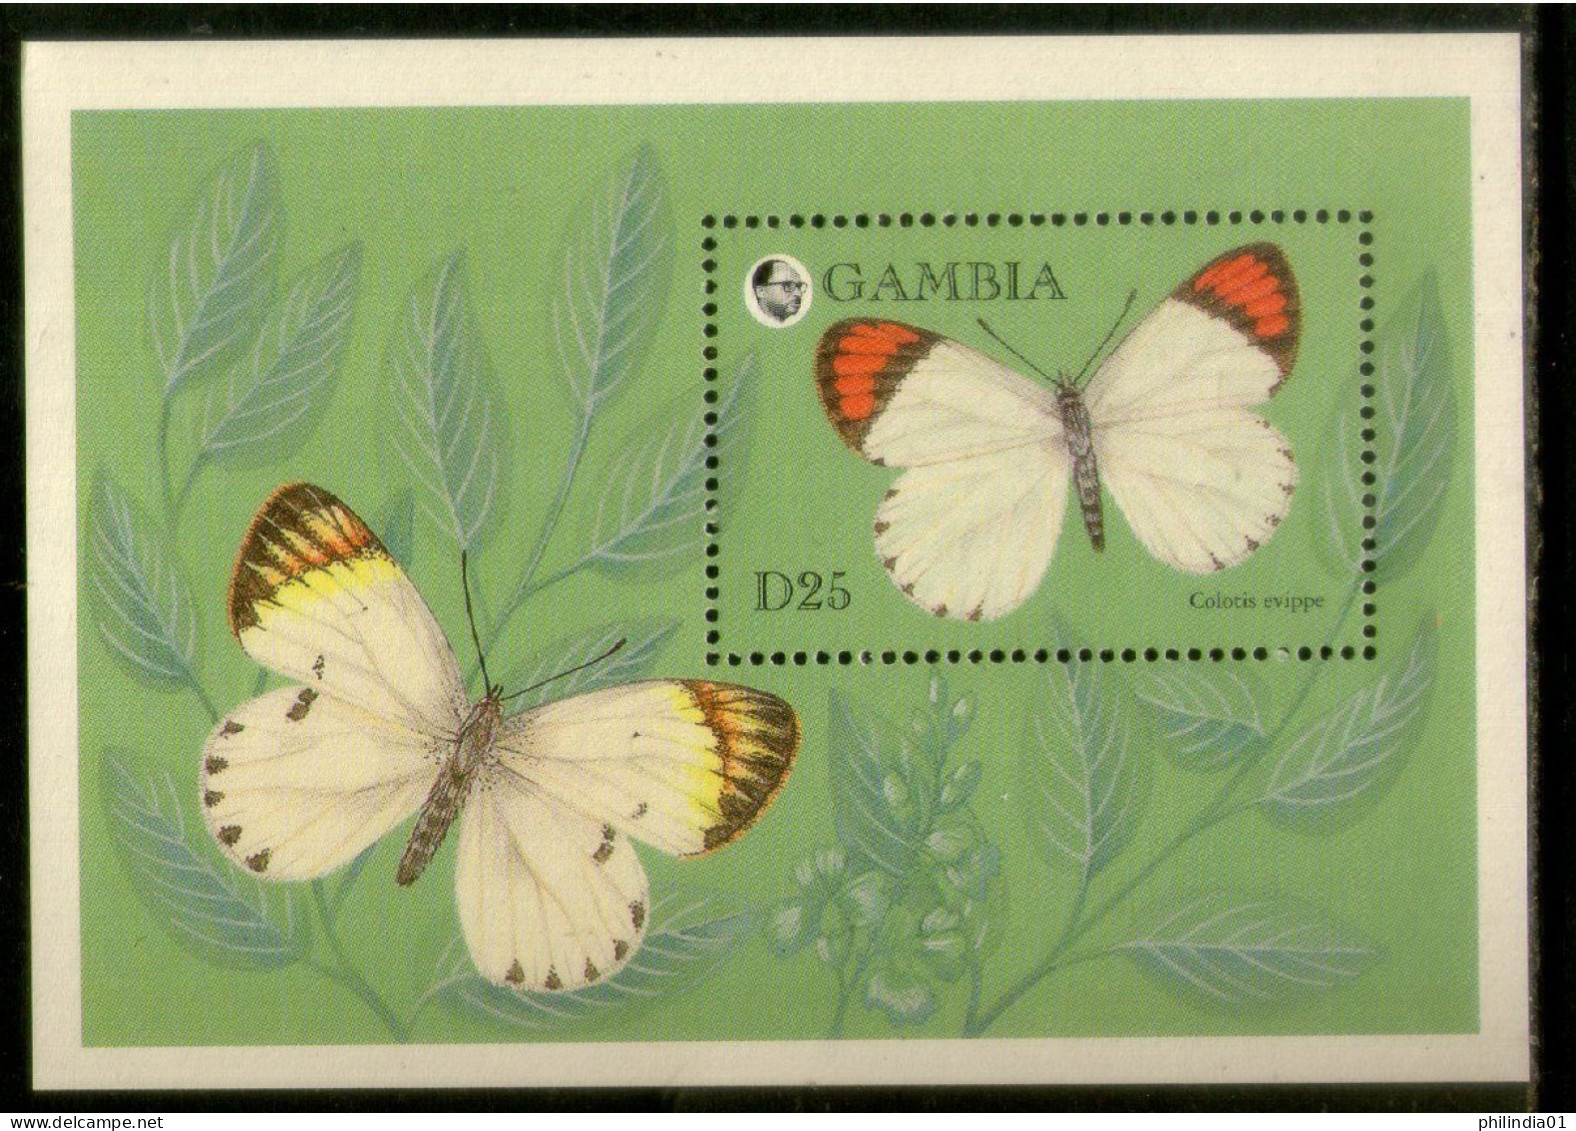 Gambia 1994 Butterflies Moth Insect Sc 1575 M/s MNH # 5306 - Vlinders